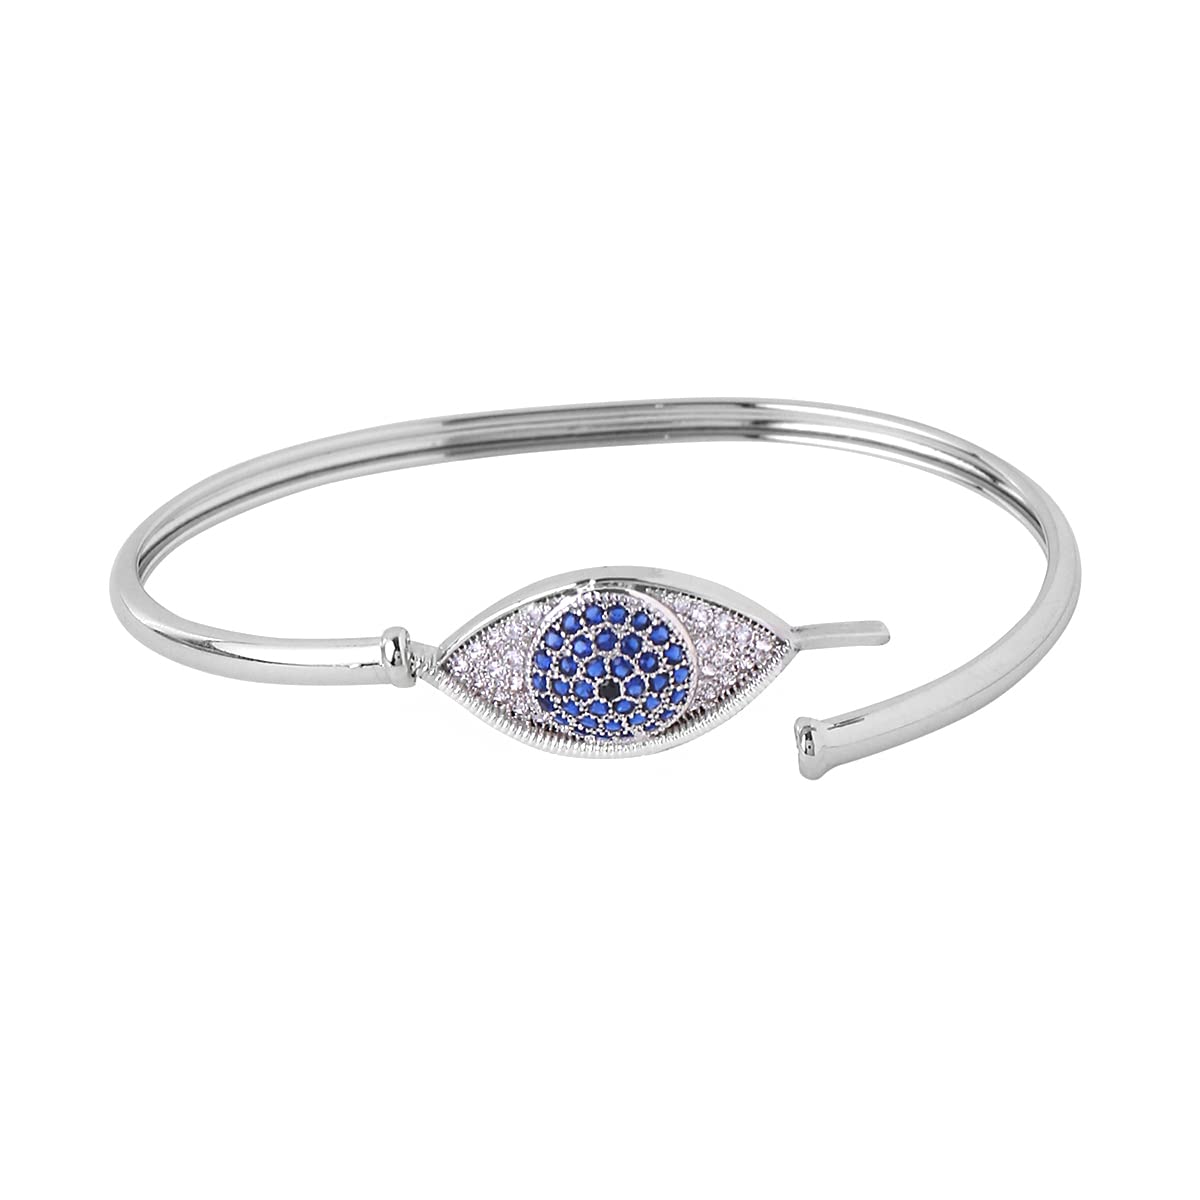 Buy Diamante Hand Bracelet for Women and Teen Girls, Hand Jewellery for  Women, Silver Slave Bracelet and Ring, Sparkling Bohemian Hand Jewelry  Online in India - Etsy